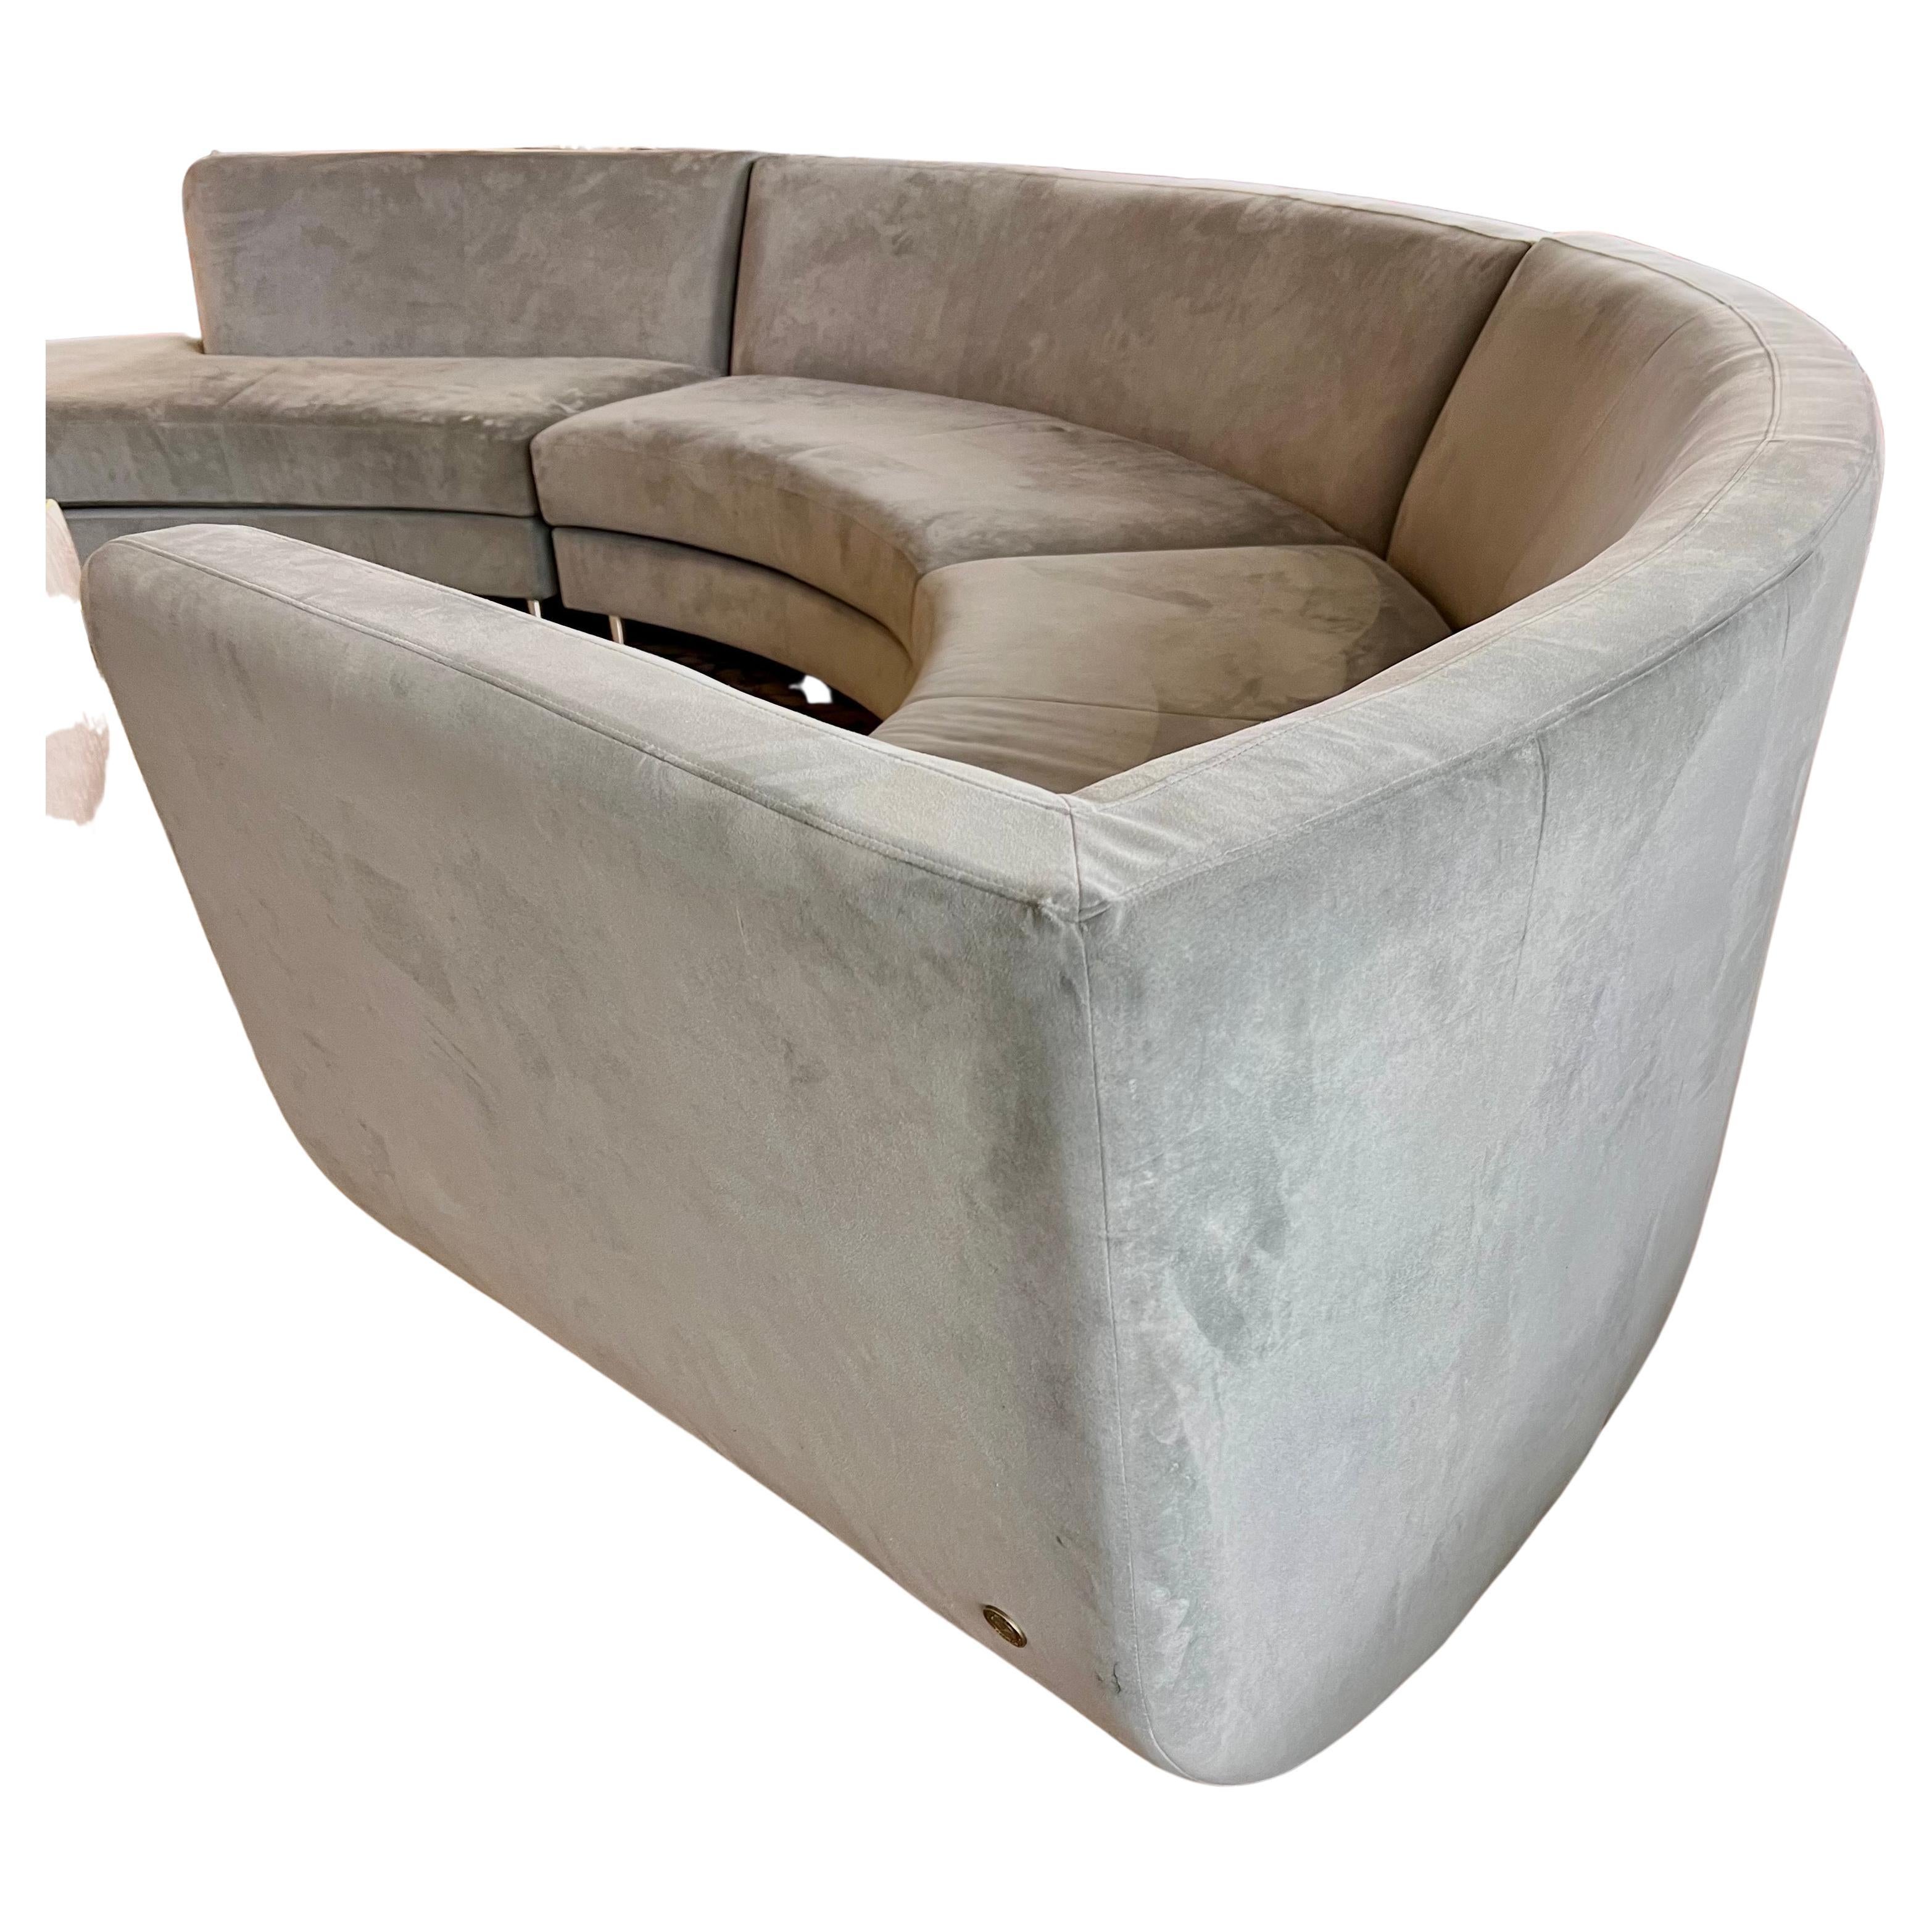 Contemporary sectional sofa inspired by
Kagan's model 